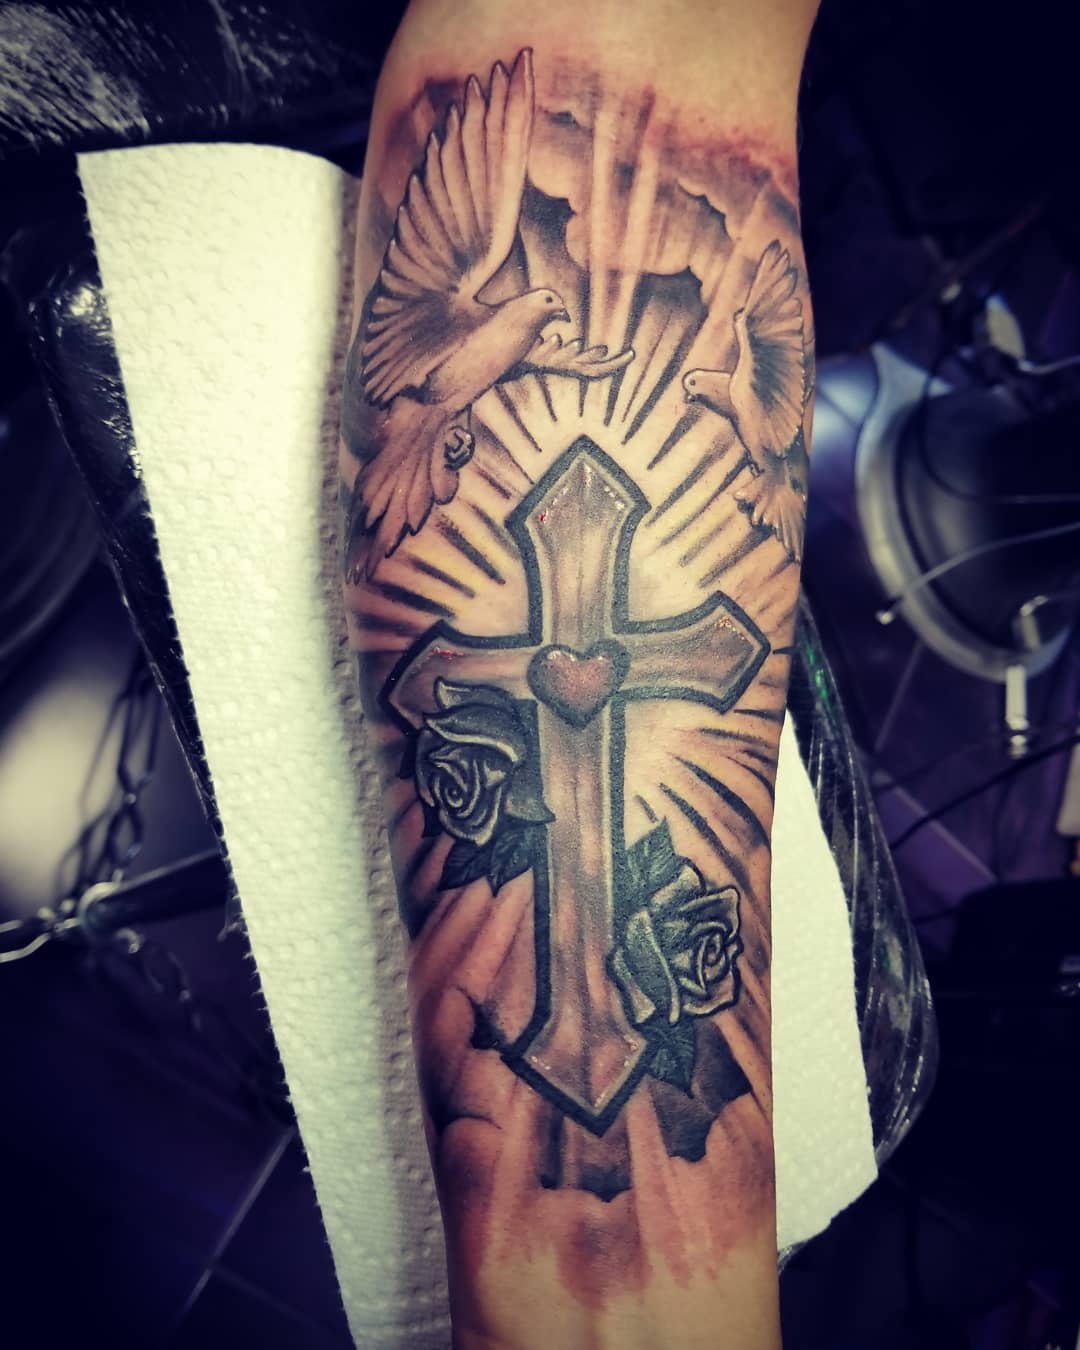 225 Best Cross Tattoo Designs With Meanings with dimensions 1080 X 1350